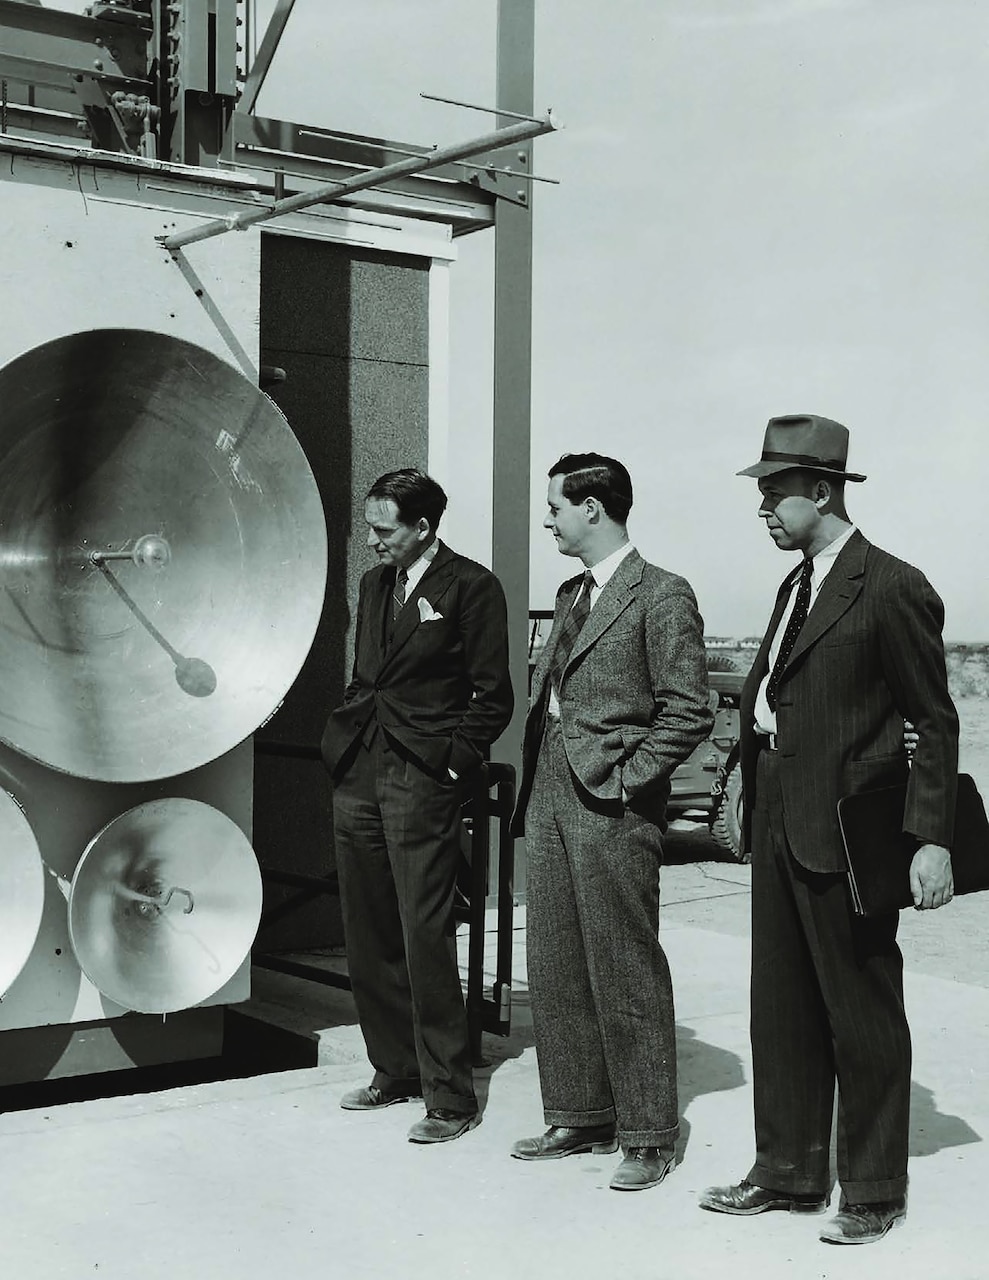 A scan, taken Oct. 26, 2023, of an archival photo, taken in 1946 near Sentinel, Arizona, shows men looking at an early antenna communication system developed by engineers of a predecessor lab of Naval Information Warfare Center (NIWC) Pacific, headquartered in San Diego.